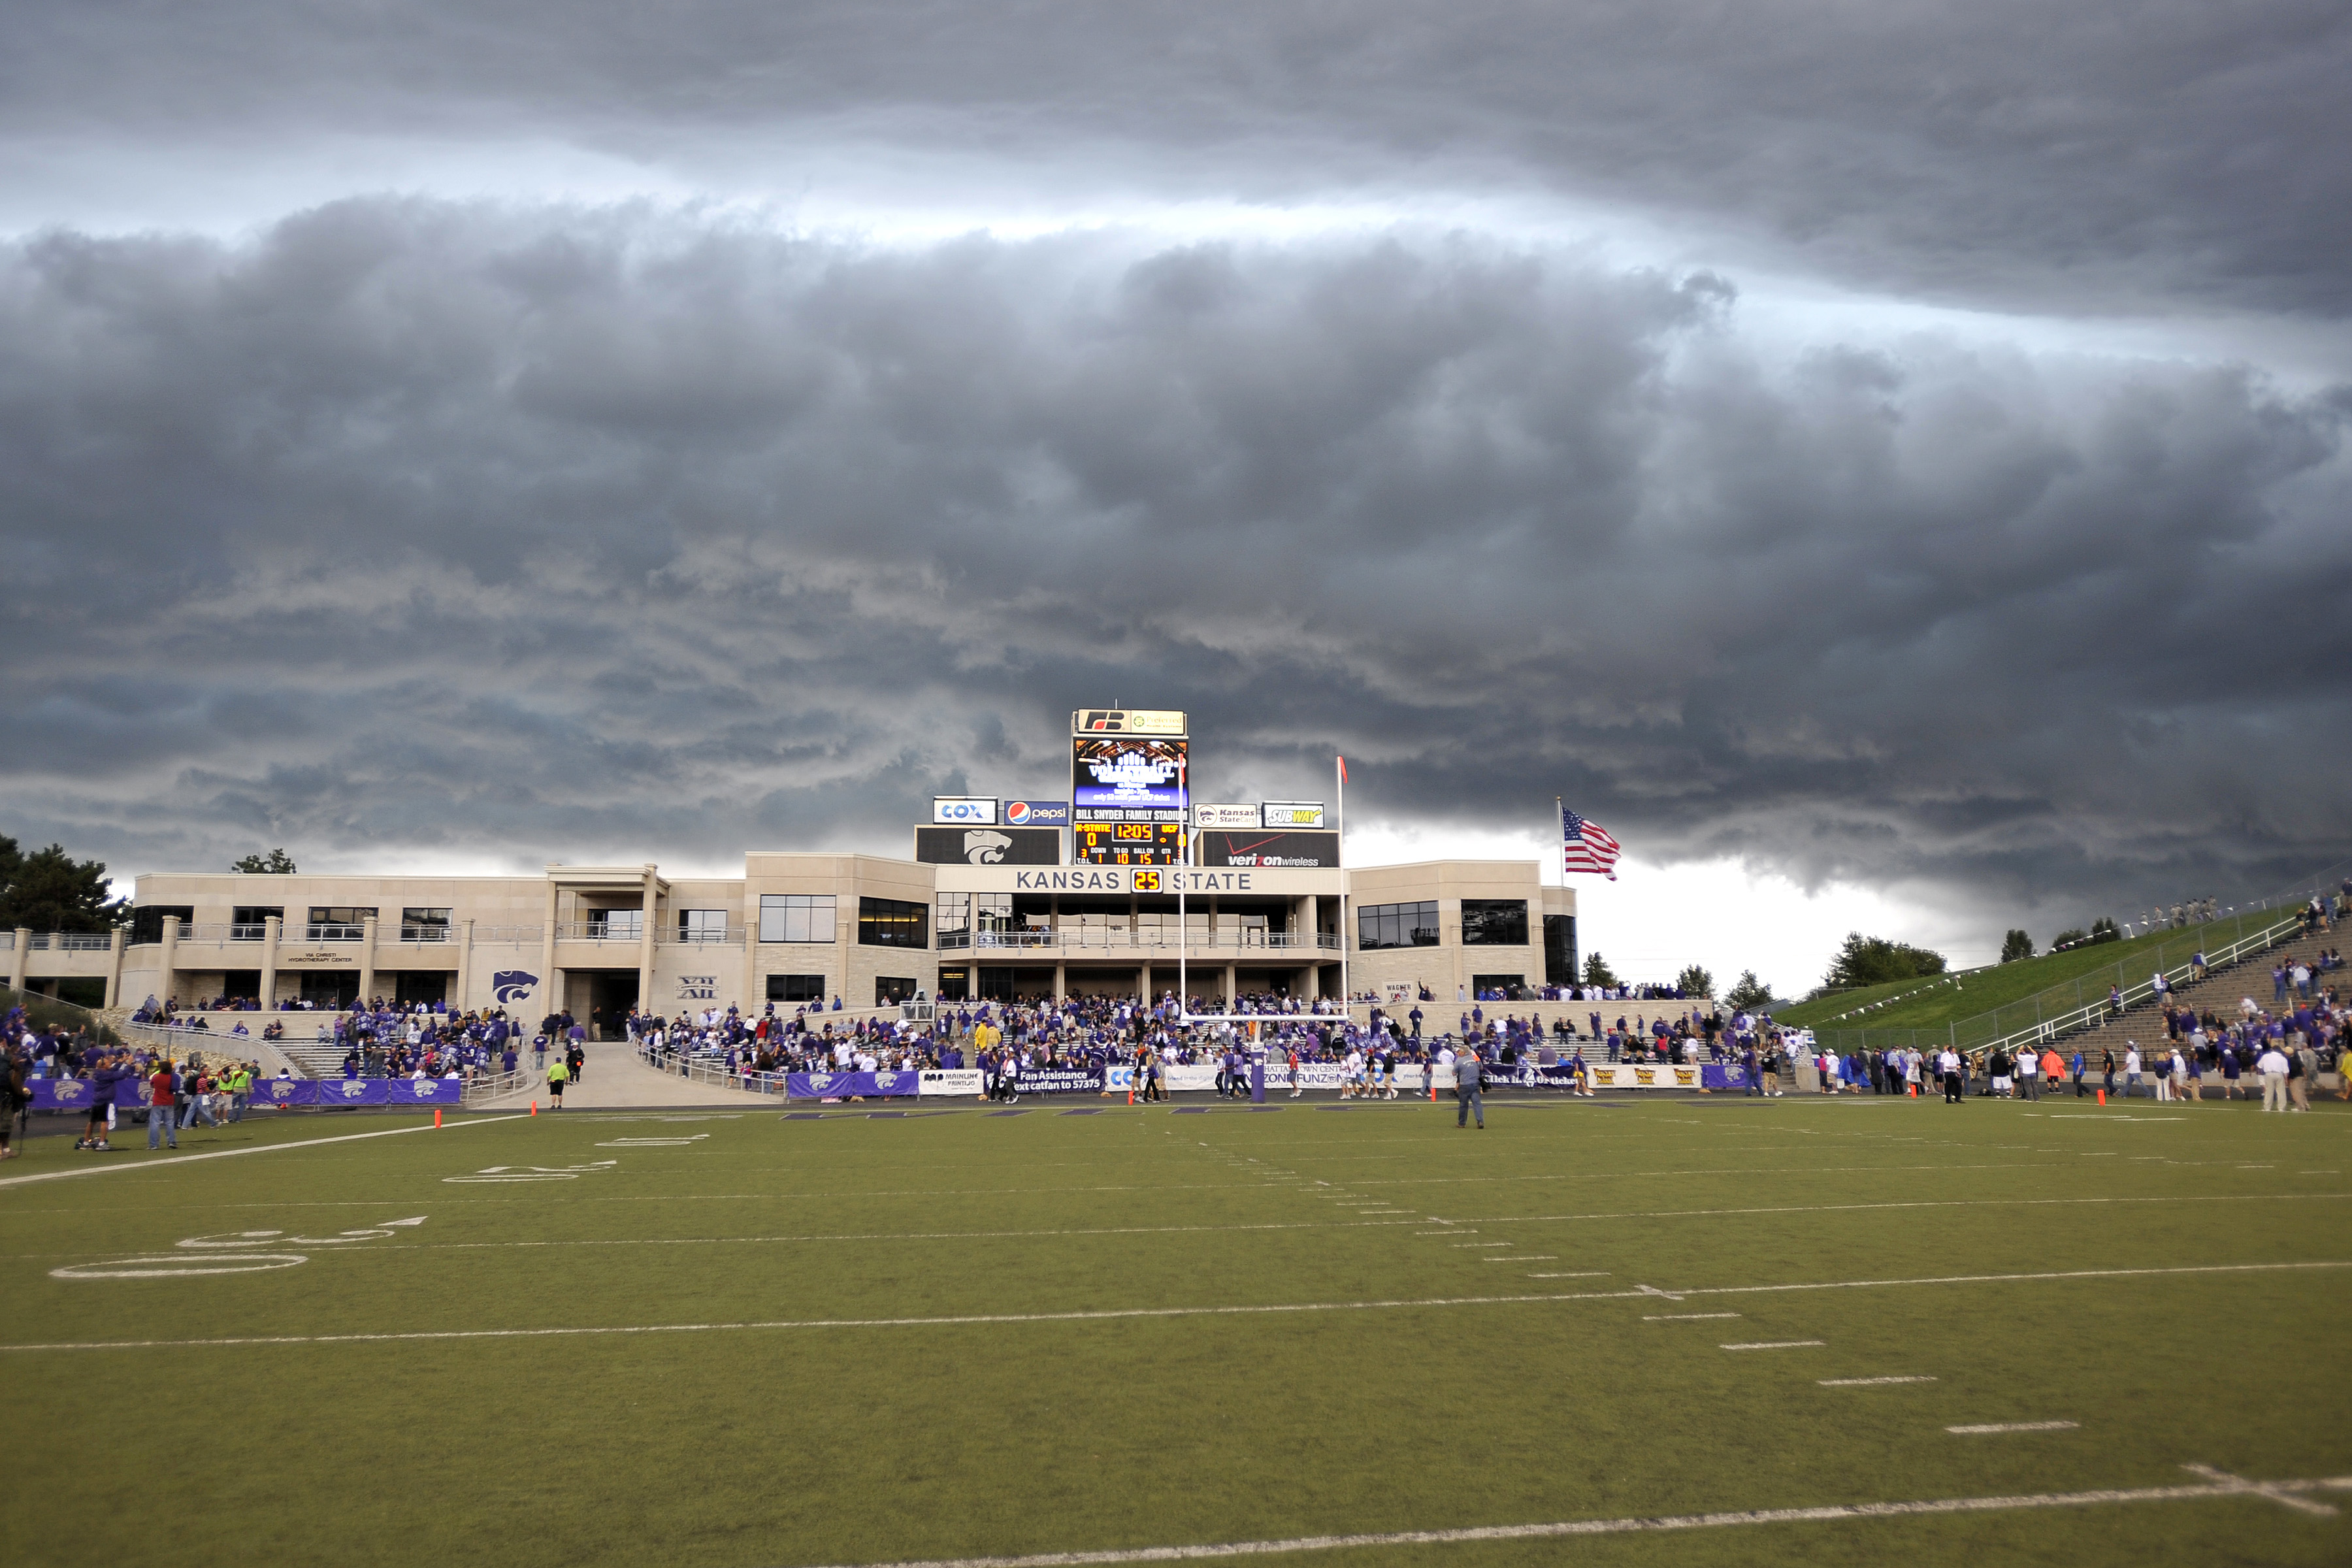 MANHATTAN, KS - SEPTEMBER 25: The game between the Kansas State Wildcats and the Central Florida Knights is suspended by thunder and lighting storms in the area on September 25, 2010 at Bill Snyder Family Stadium in Manhattan, Kansas.